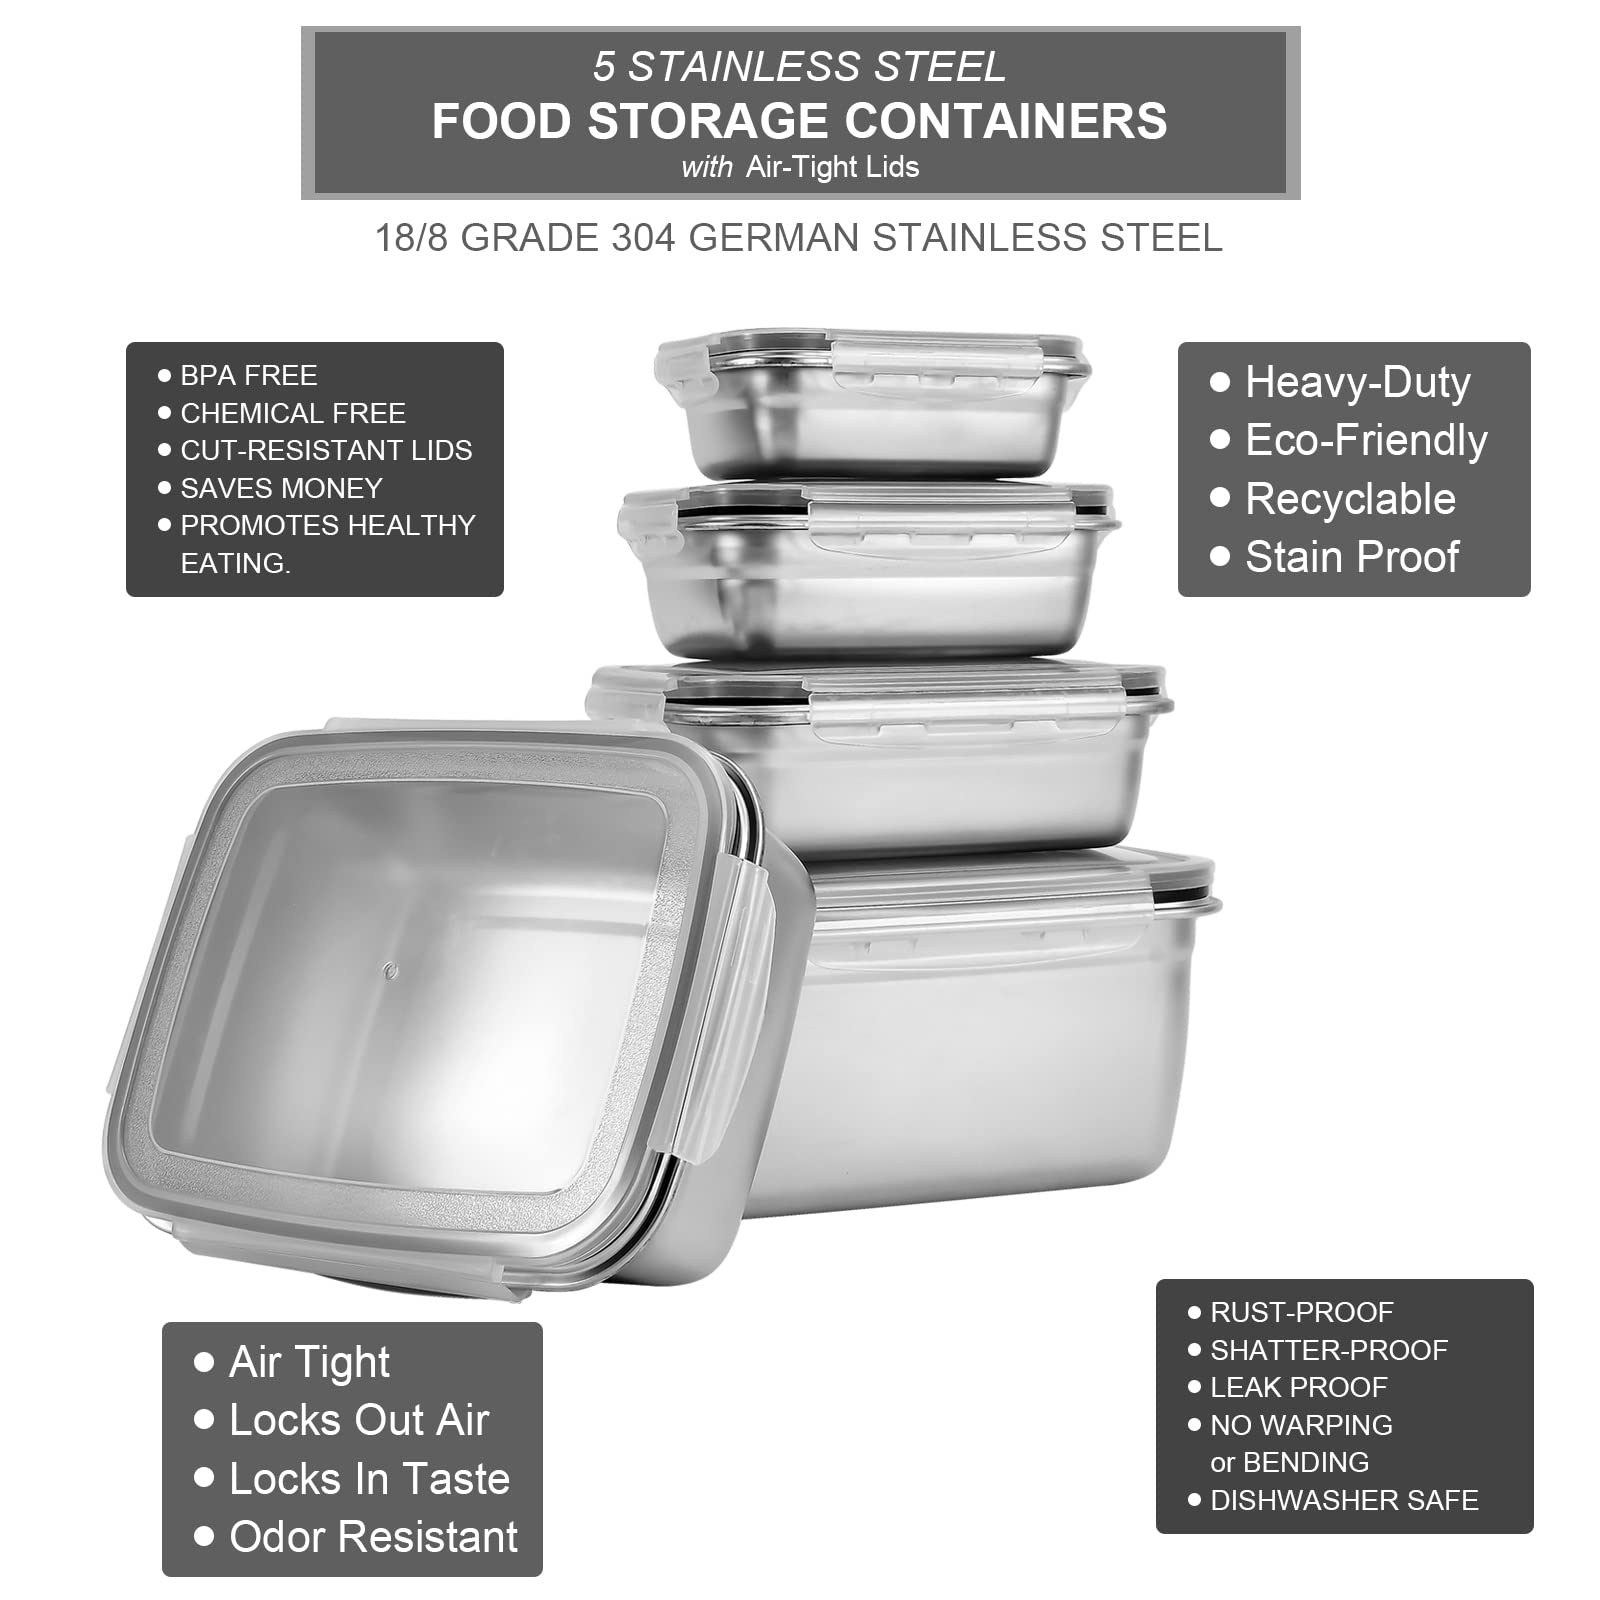 UPTRUST Stainless Steel Food Storage Containers, Airtight Lids, Set of 5 Containers, BPA Free, Dishwasher & Freezer Safe, Meal Prep Lunch Box, Leak Proof Stackable Light and Easy Storage